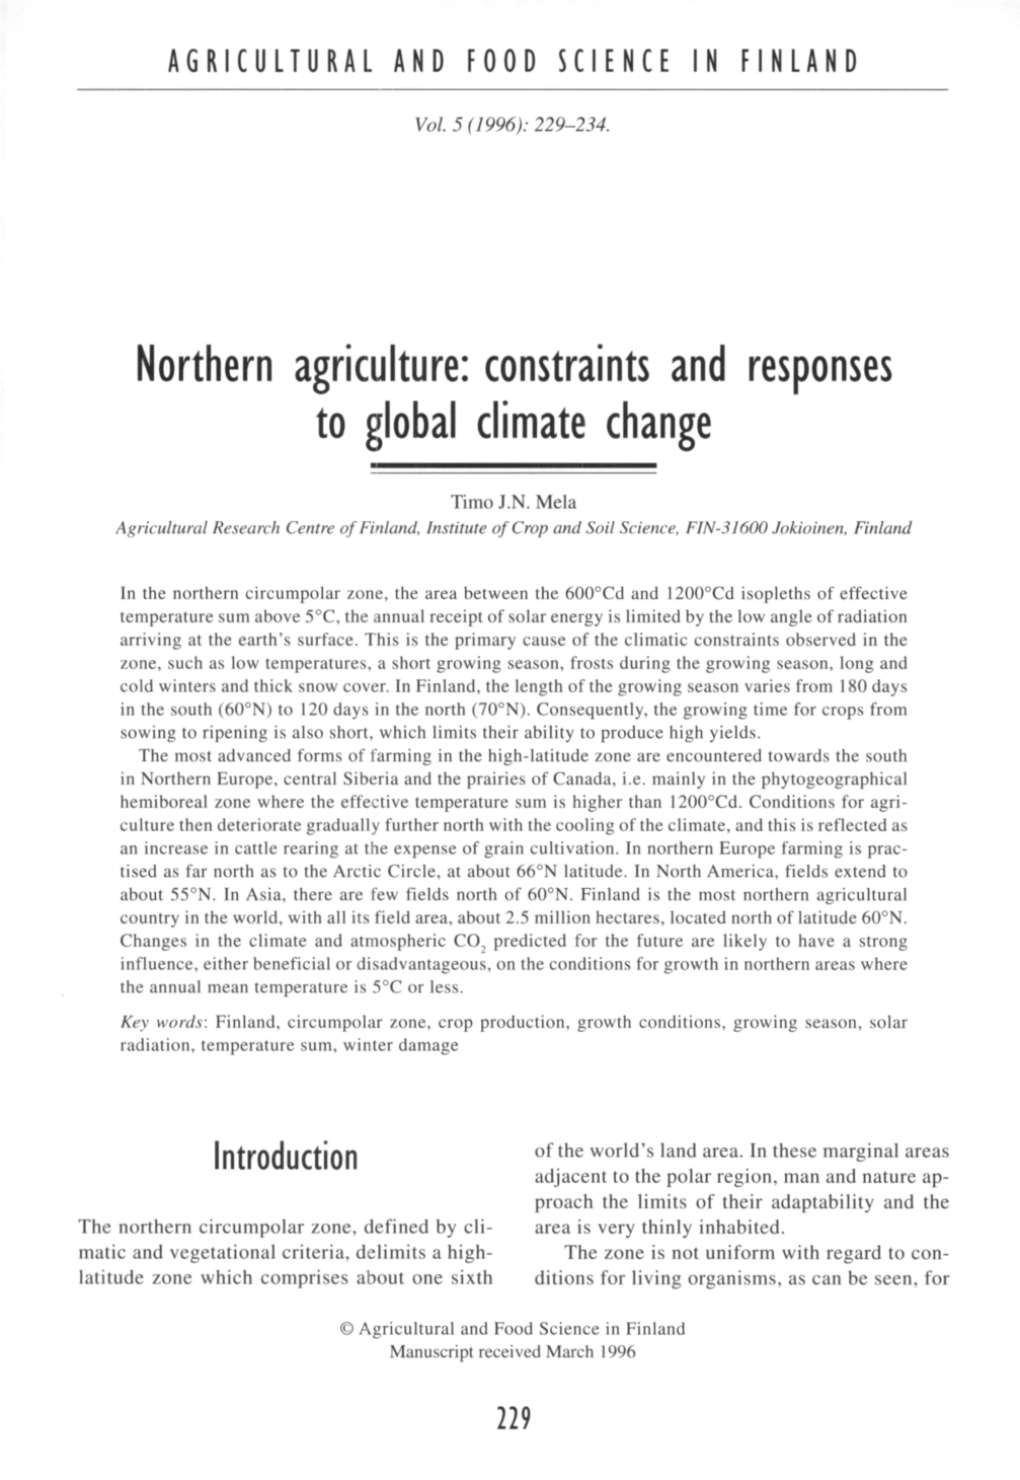 Northern Agriculture: Constraints and Responses to Global Climate Change